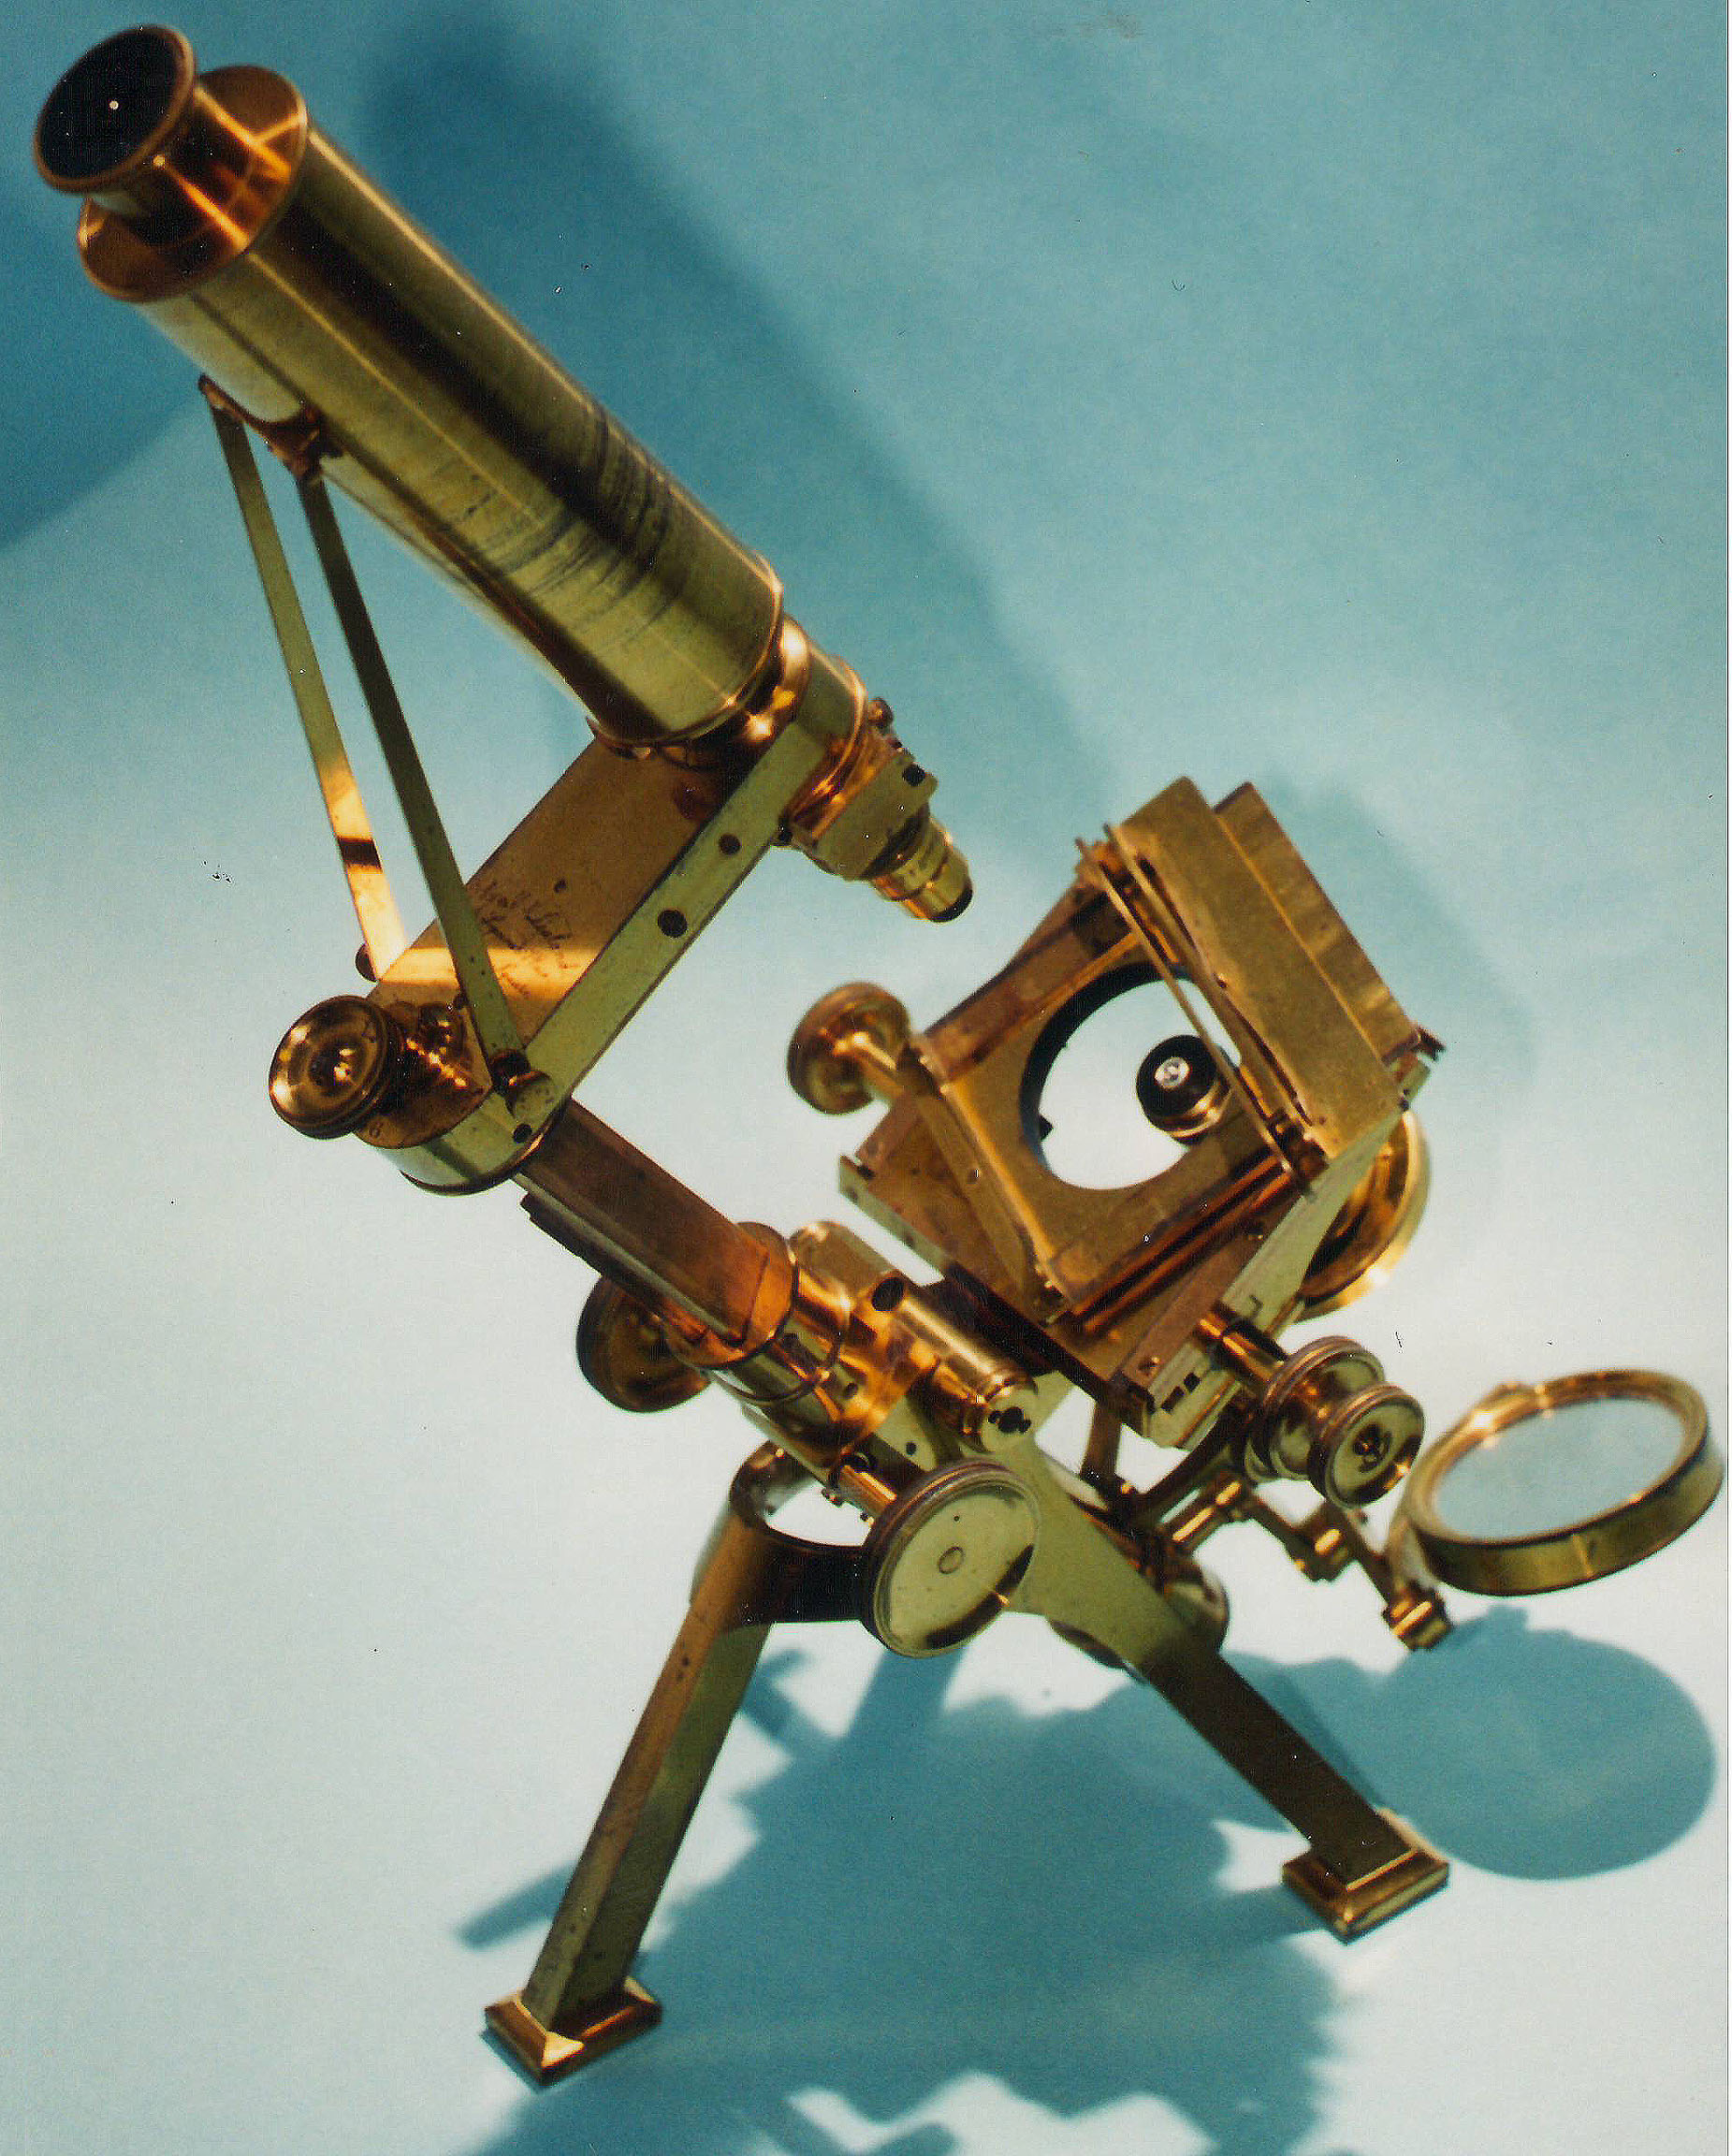 Powell & Lealand Improved First Class Microscope